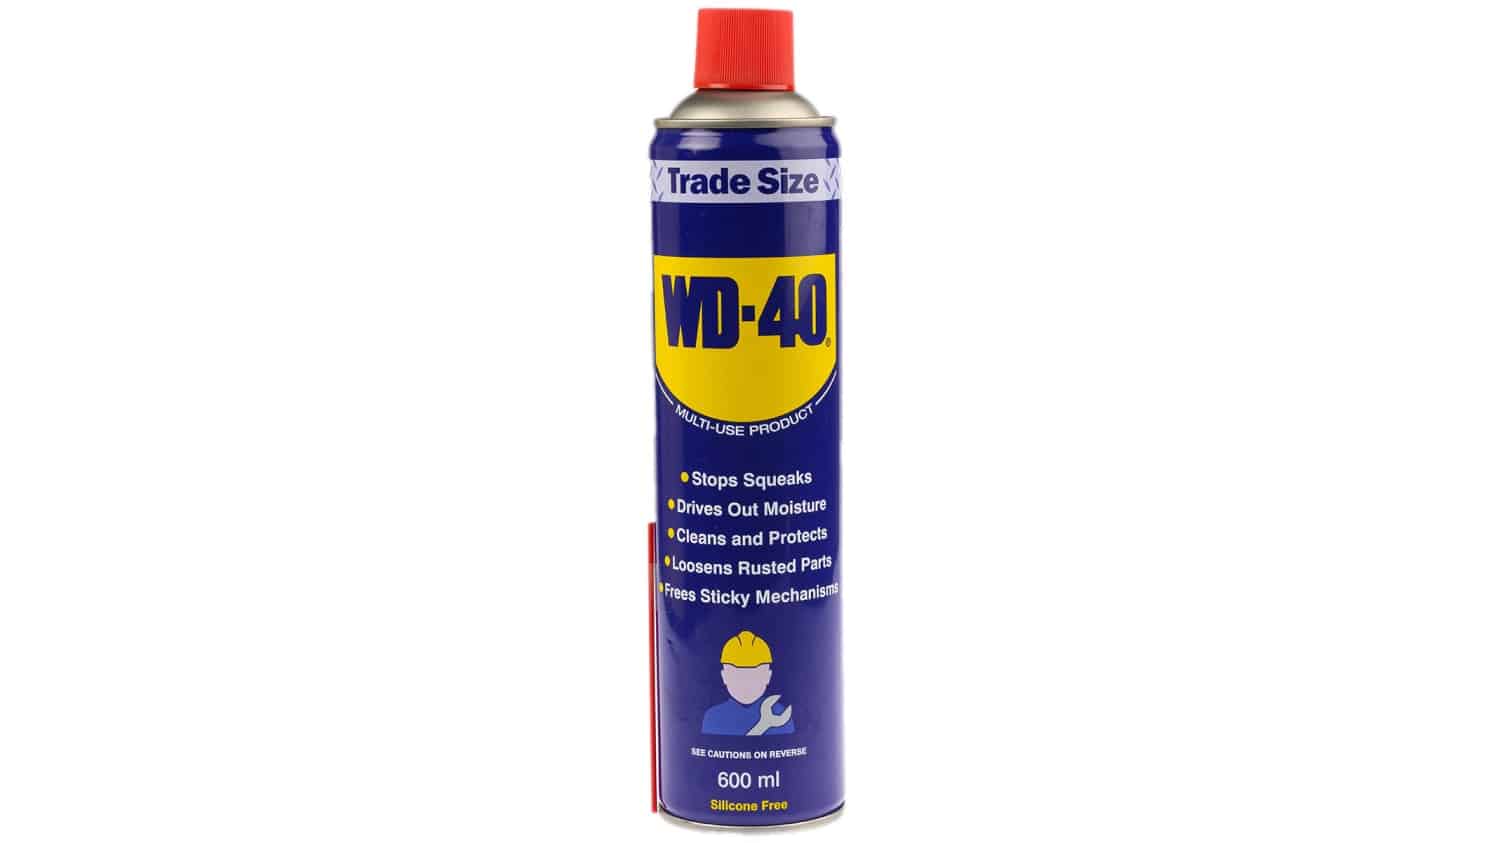 WD-40 Can Be Useful